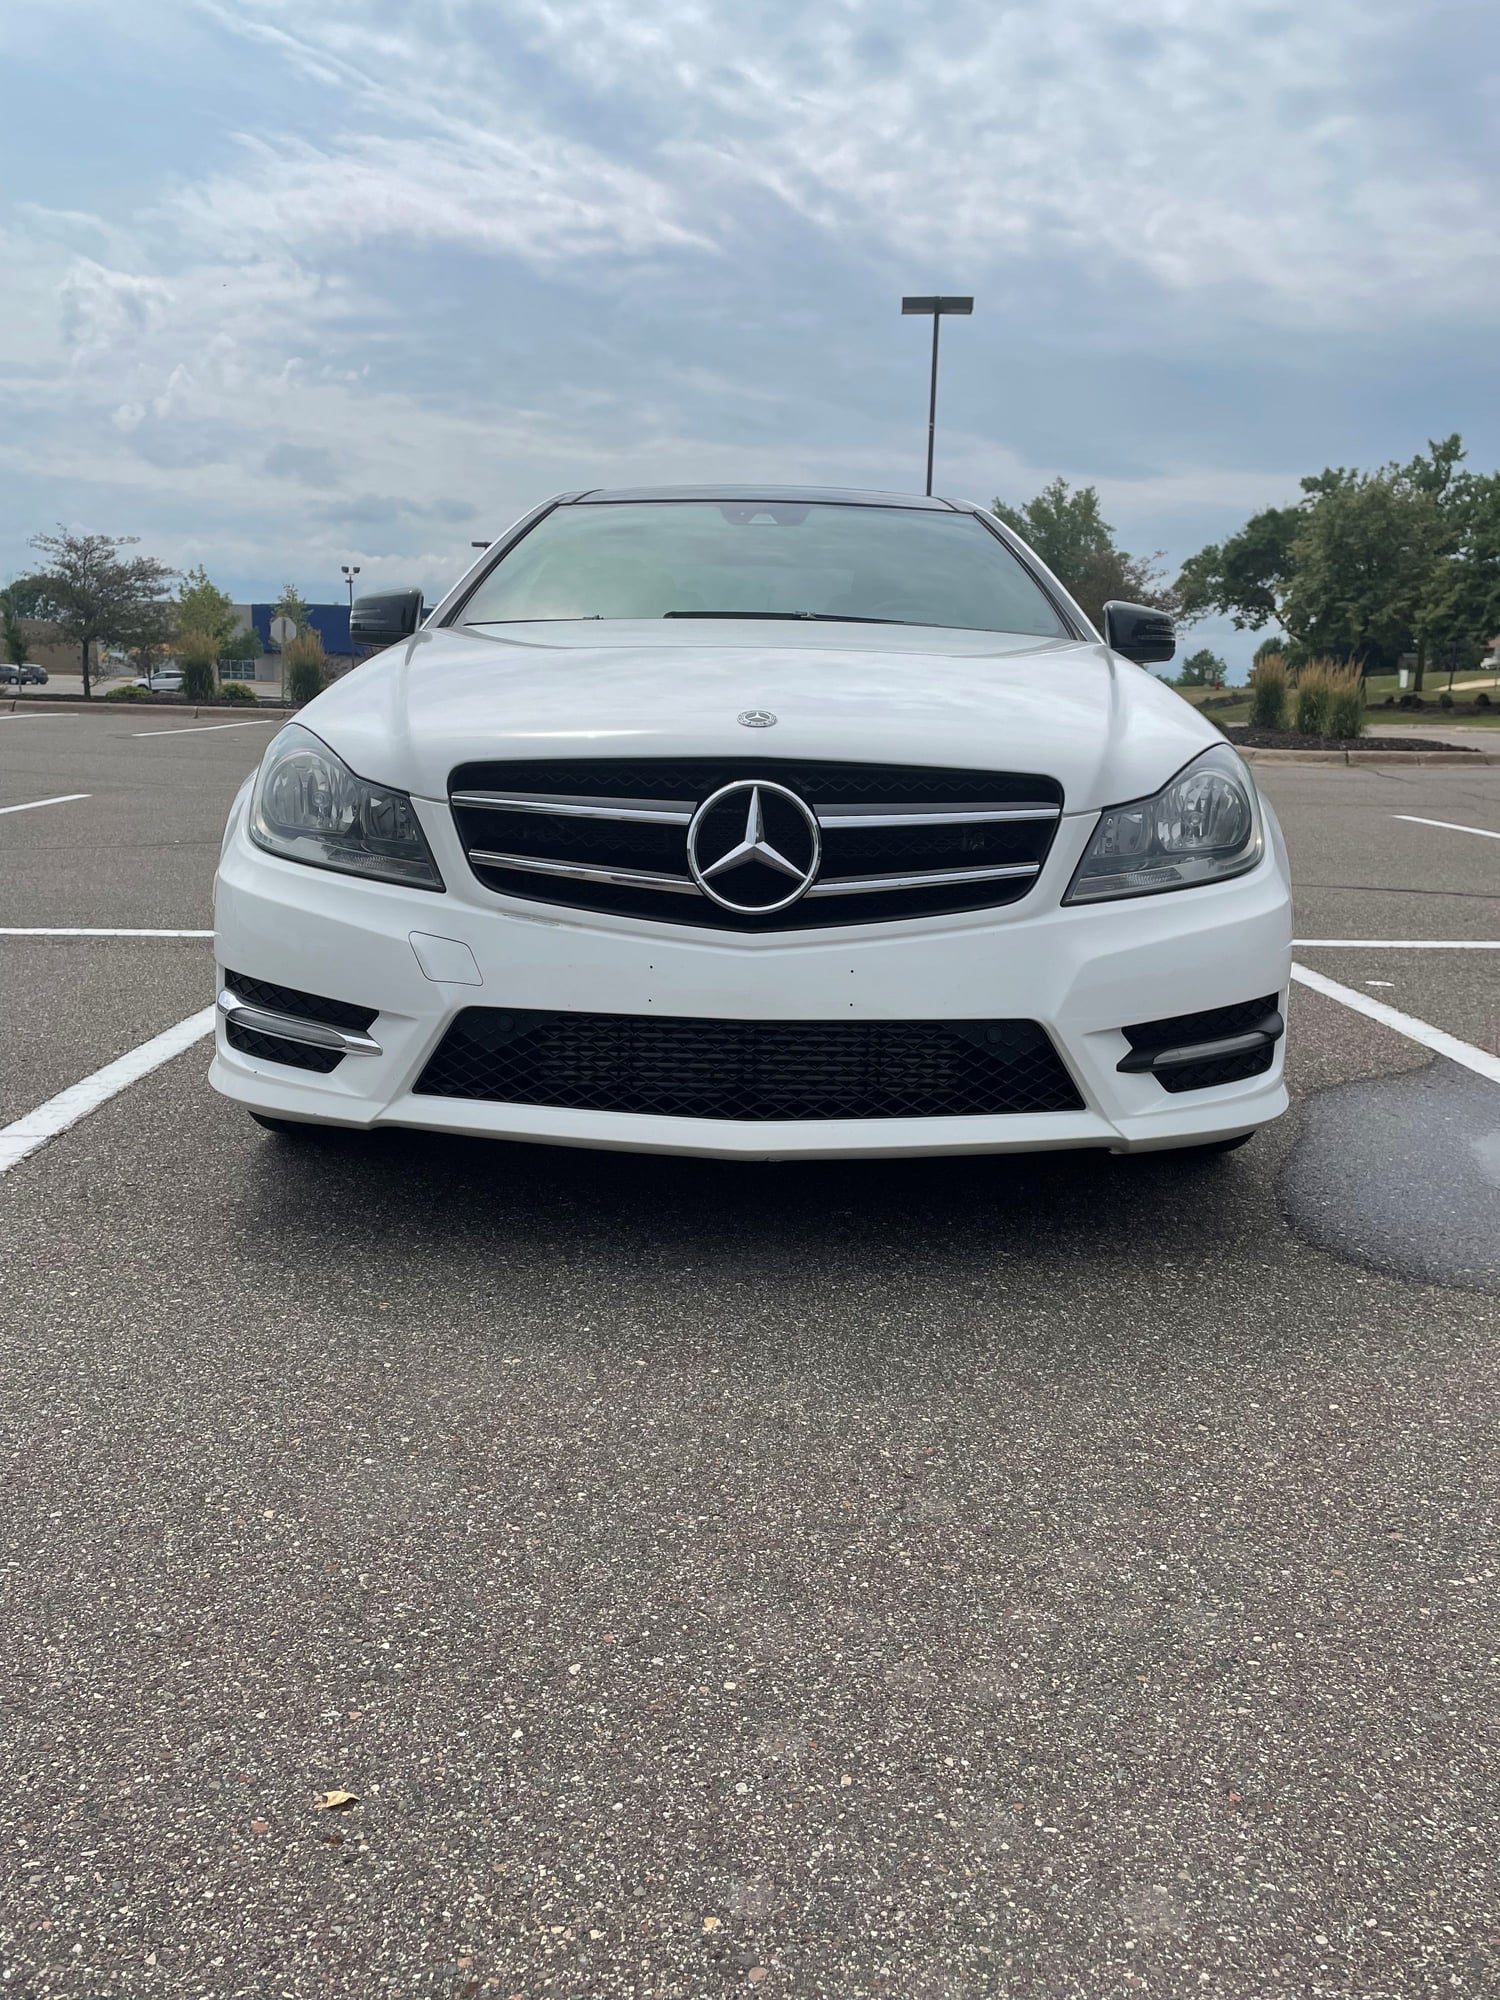 2013 Mercedes-Benz C250 - 2013 C250 - 82K miles, Armytrix Valvetronic Quad Exhaust, 2 sets of AMG rims, + more - Used - VIN WDDGJ4HB1DF963488 - 82,000 Miles - 4 cyl - 2WD - Automatic - Coupe - White - Oakdale, MN 55128, United States